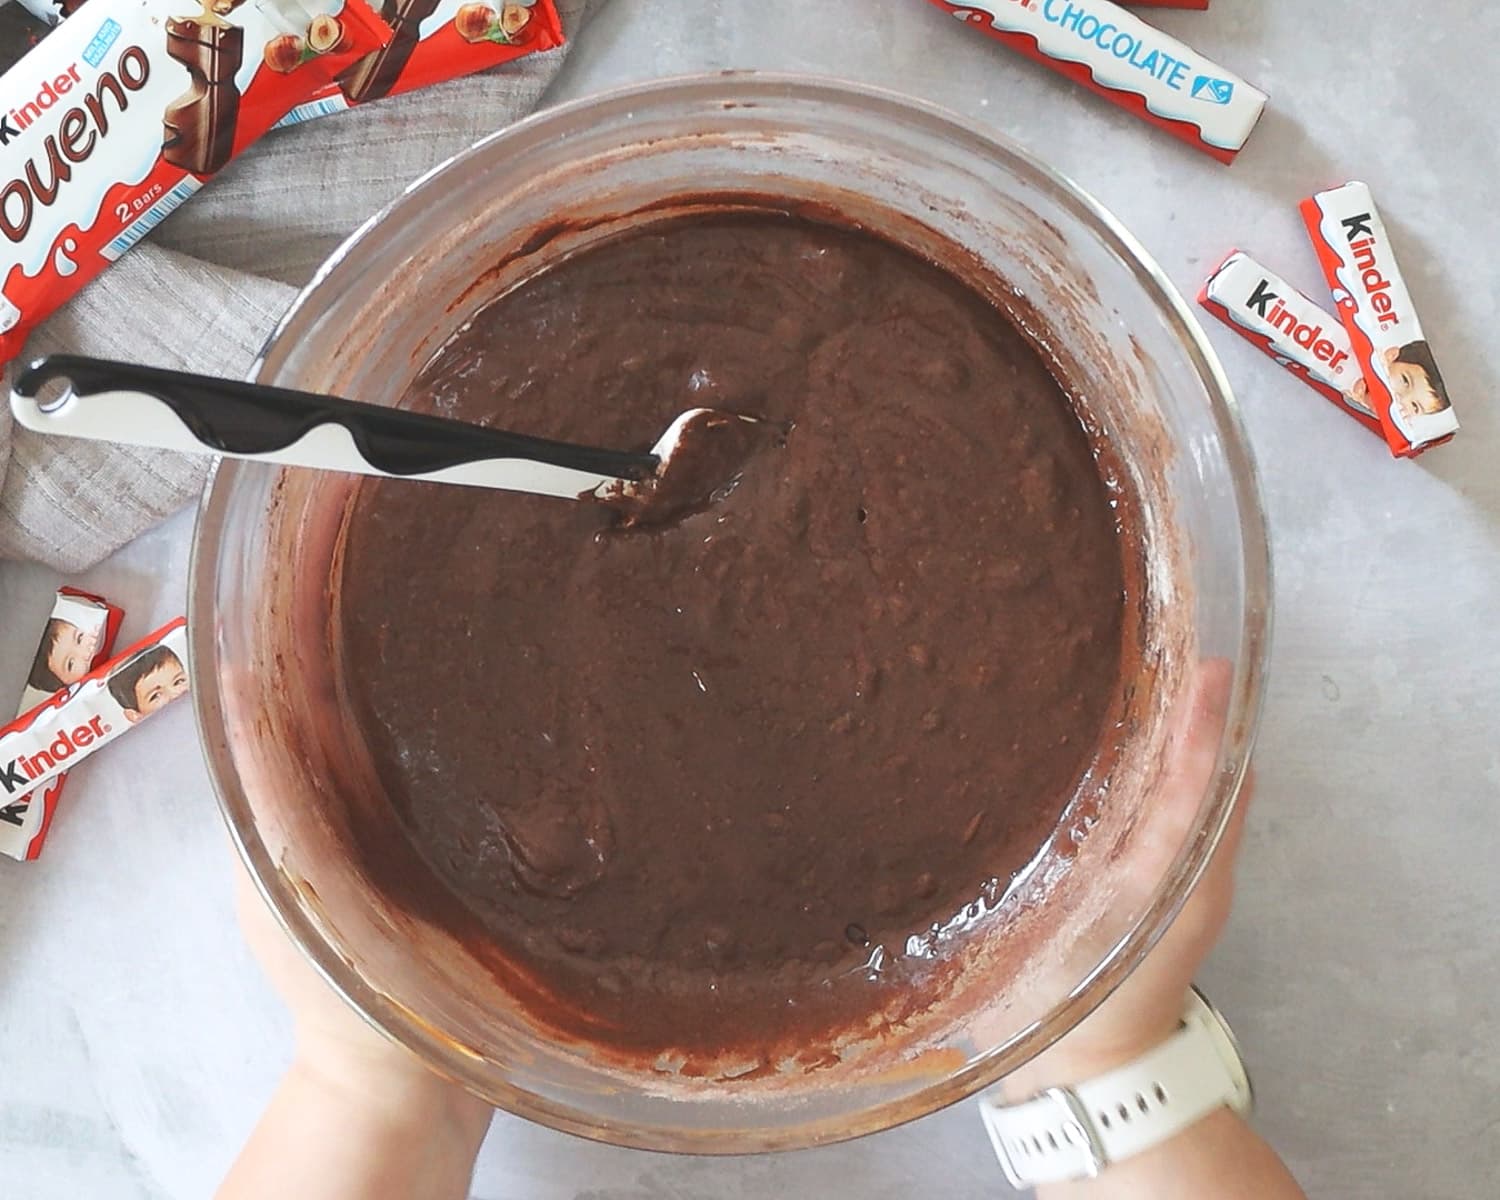 Chocolate batter in a mixing bowl